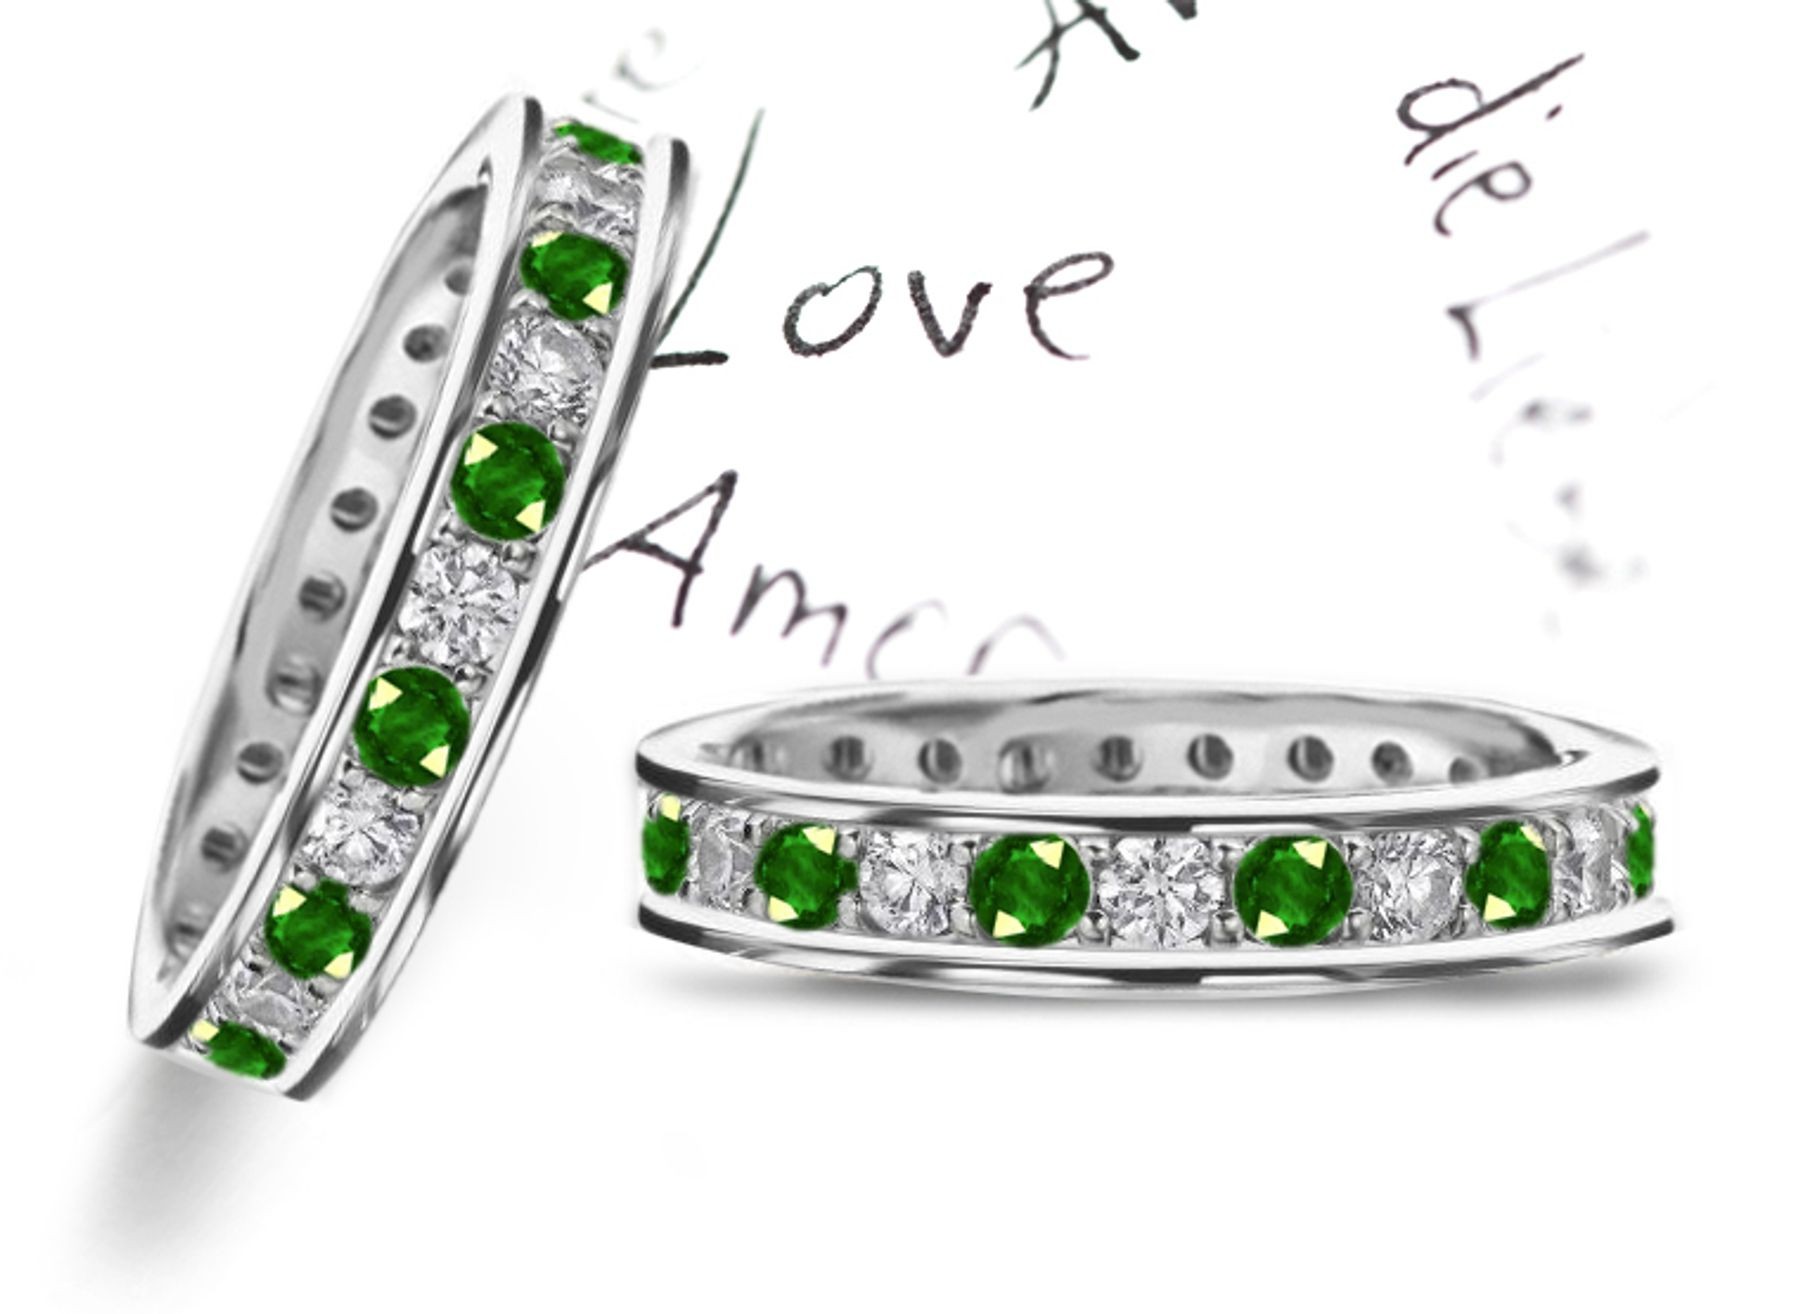 Shining & Gleaming: Prong Channel Set Emerald & Diamond Eternity Band in Gold with Brilliant Green of Olives